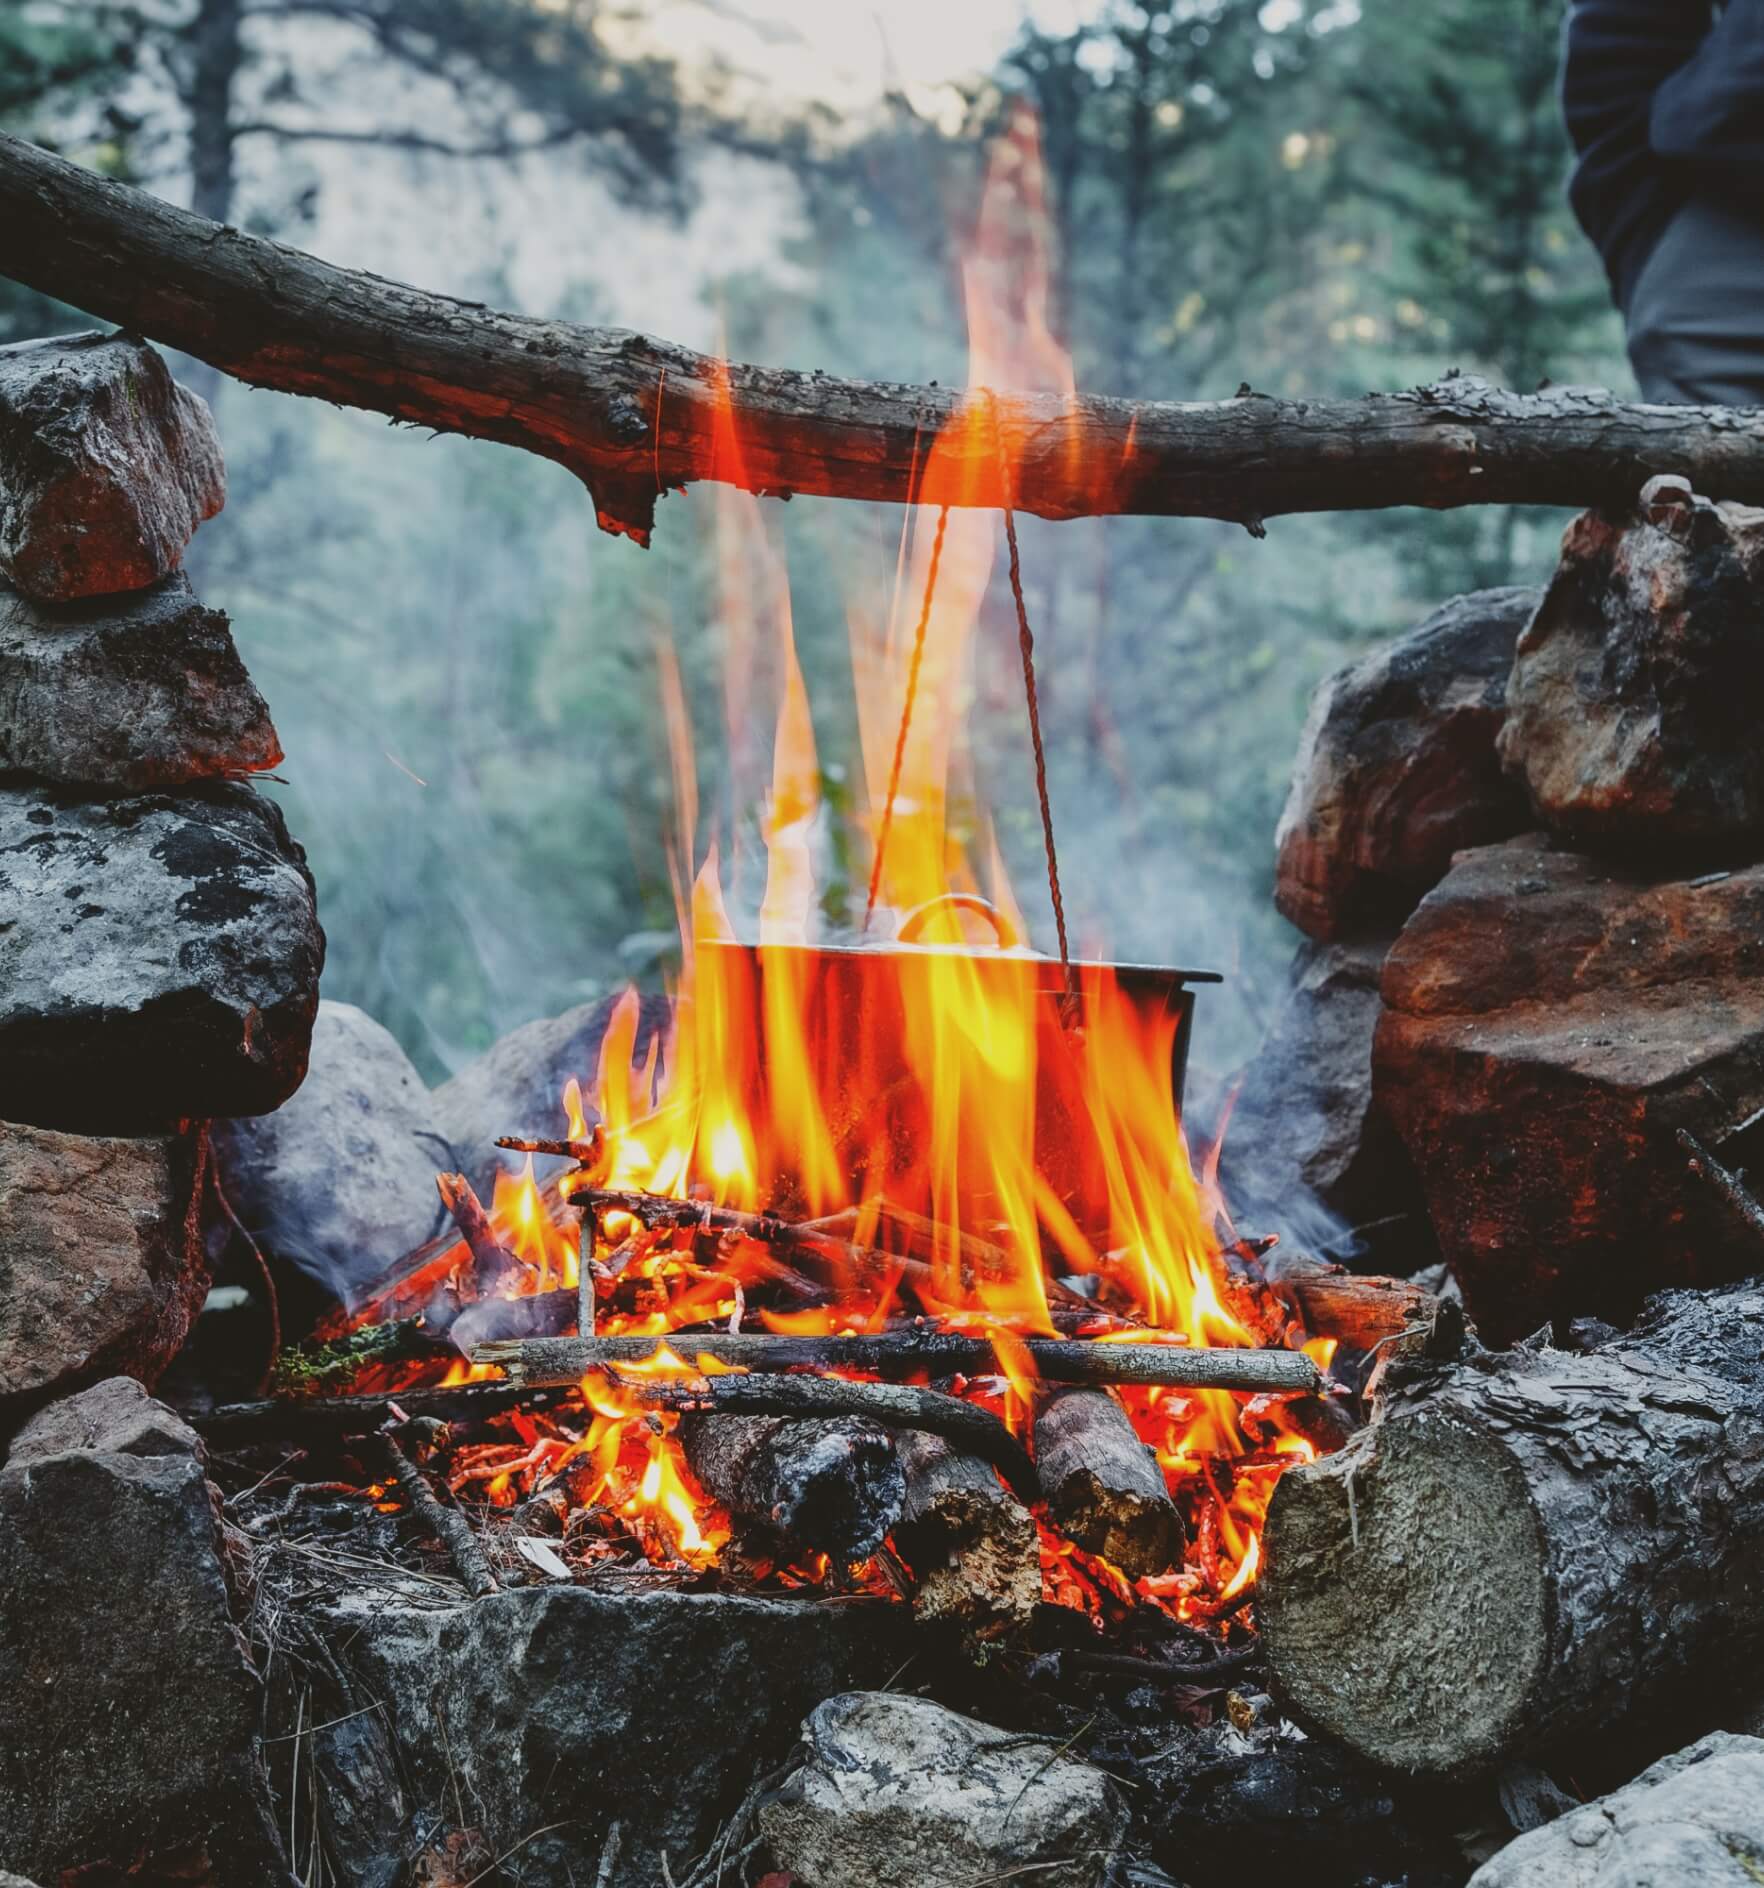 Image showing a pot over a camp fire